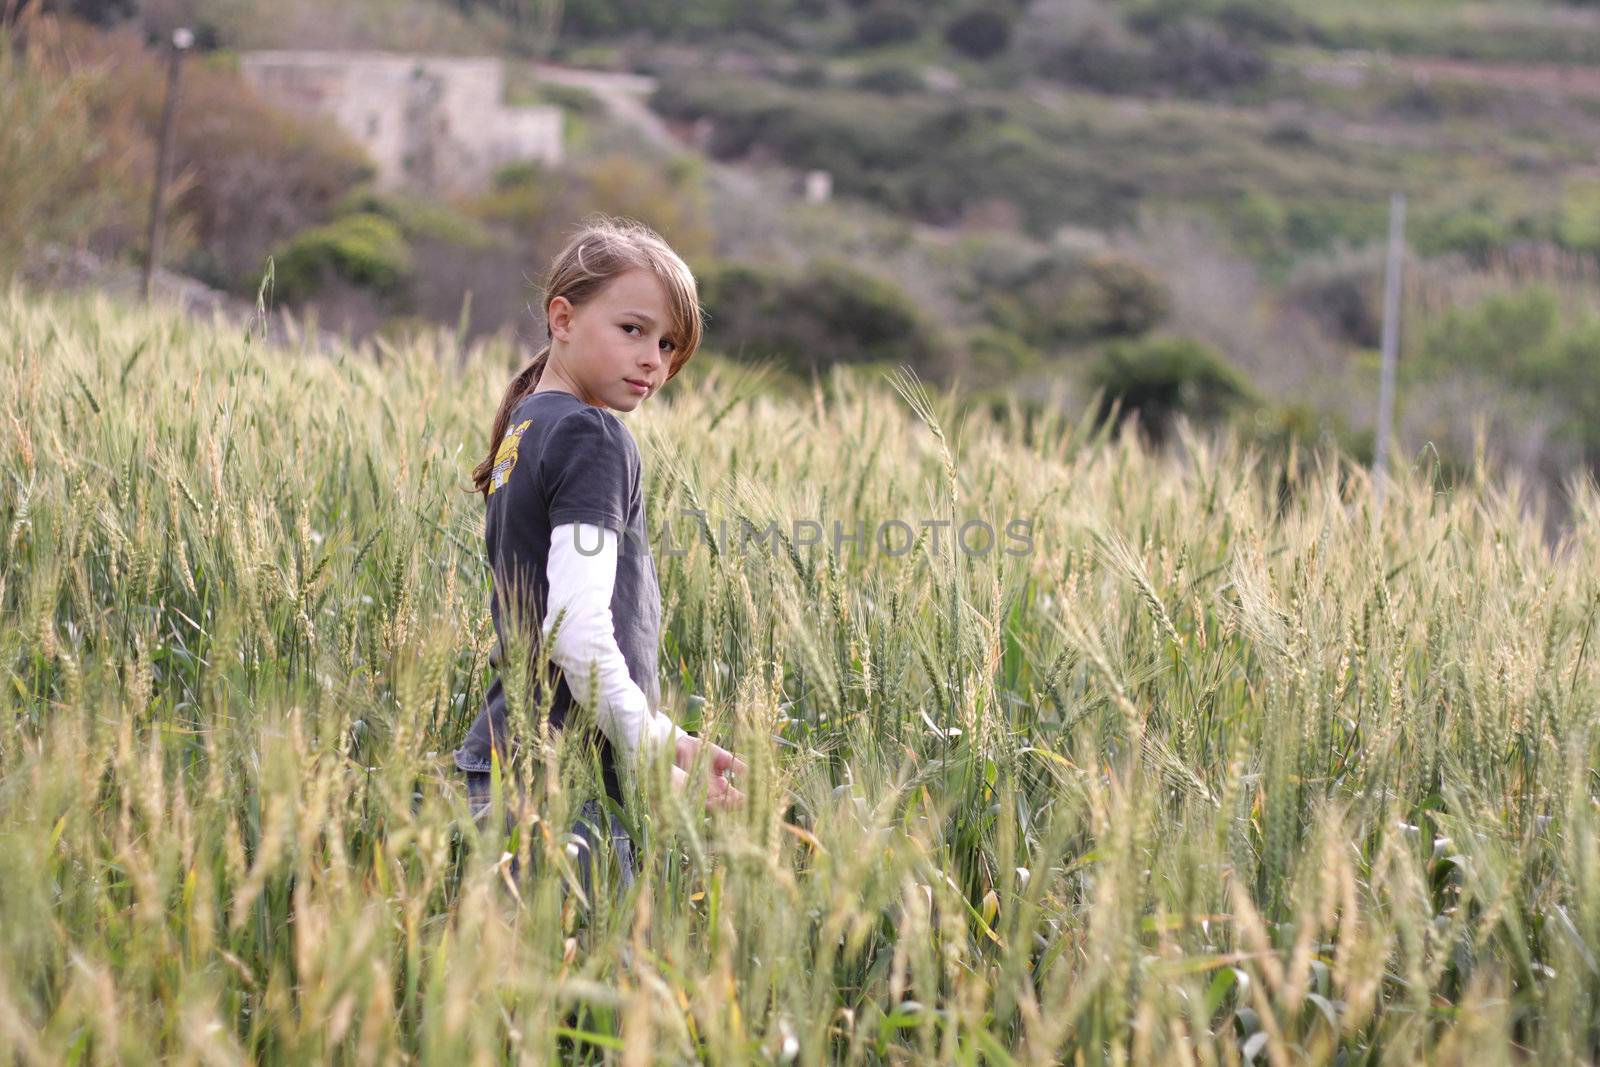 A young girl standing in a field, turning towards the camera. Positive feeling